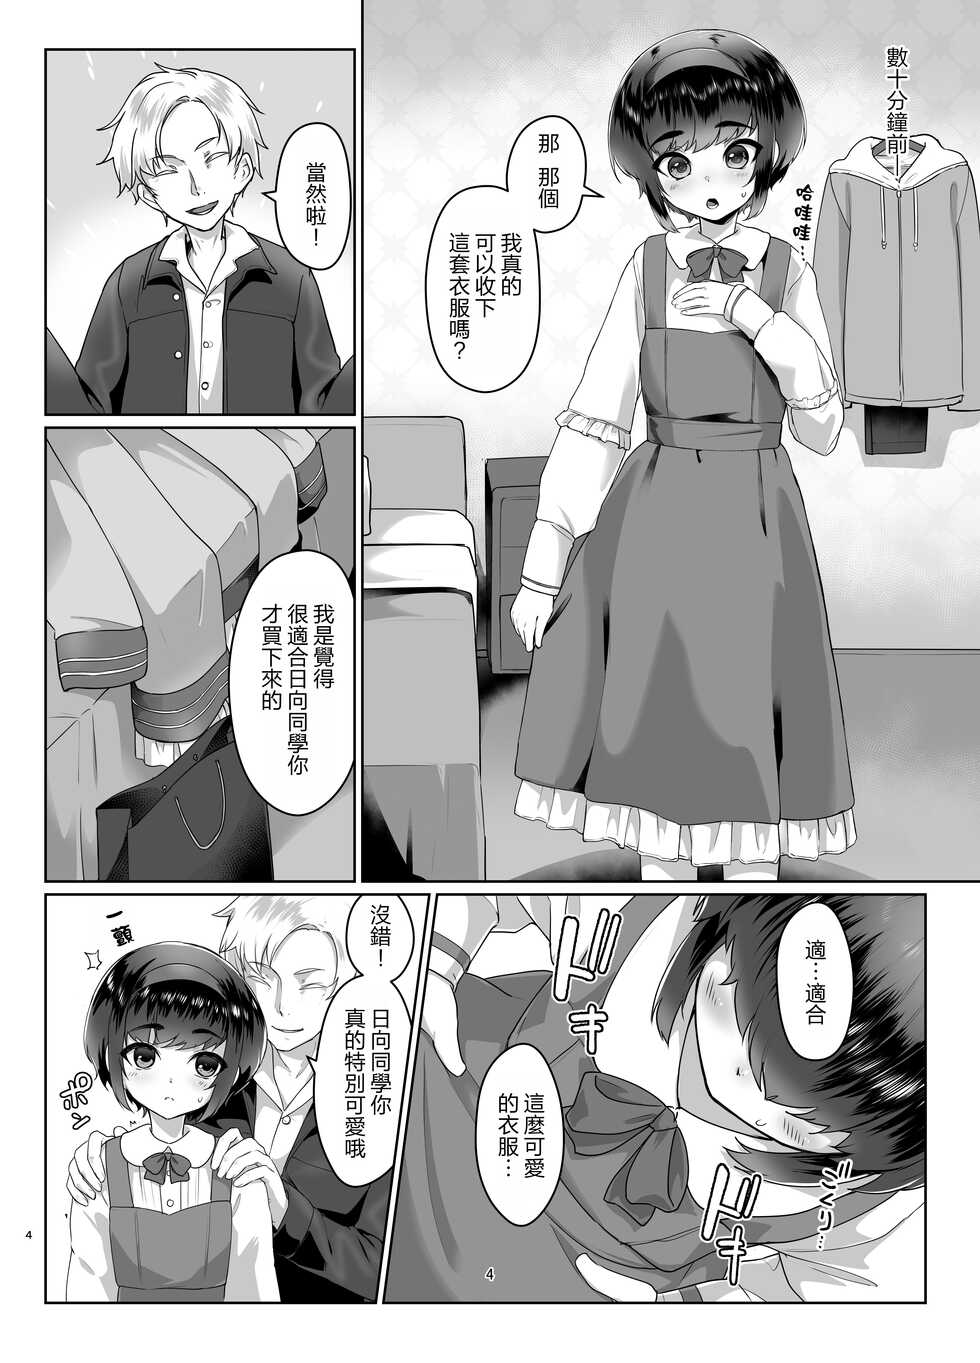 [face to face (ryoattoryo)] Tooi Hinata 2 [Chinese] [AX個人漢化] [Digital] - Page 4